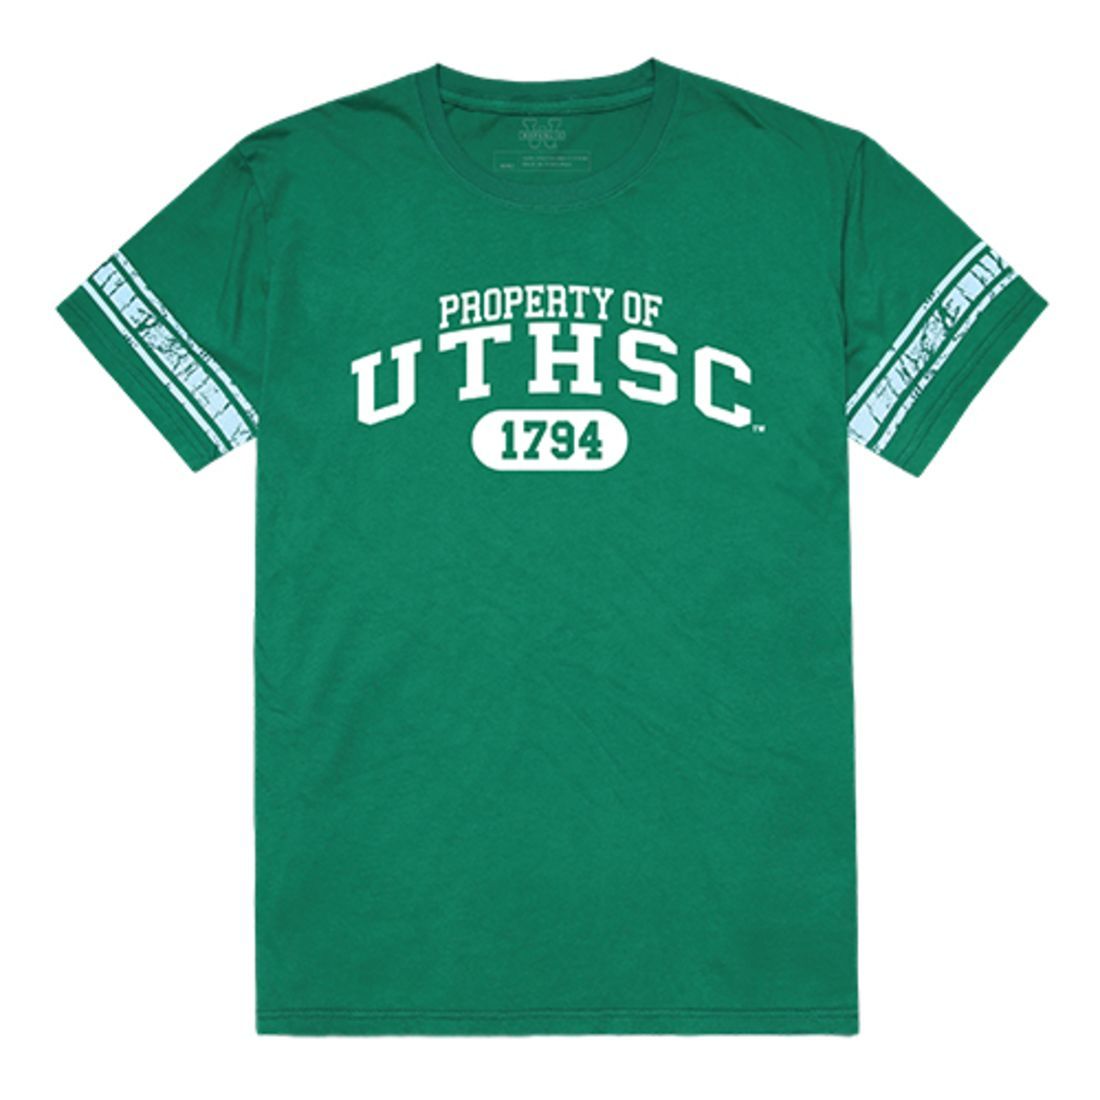 UTHSC University of Tennessee Health Science Center Property T-Shirt Kelly-Campus-Wardrobe